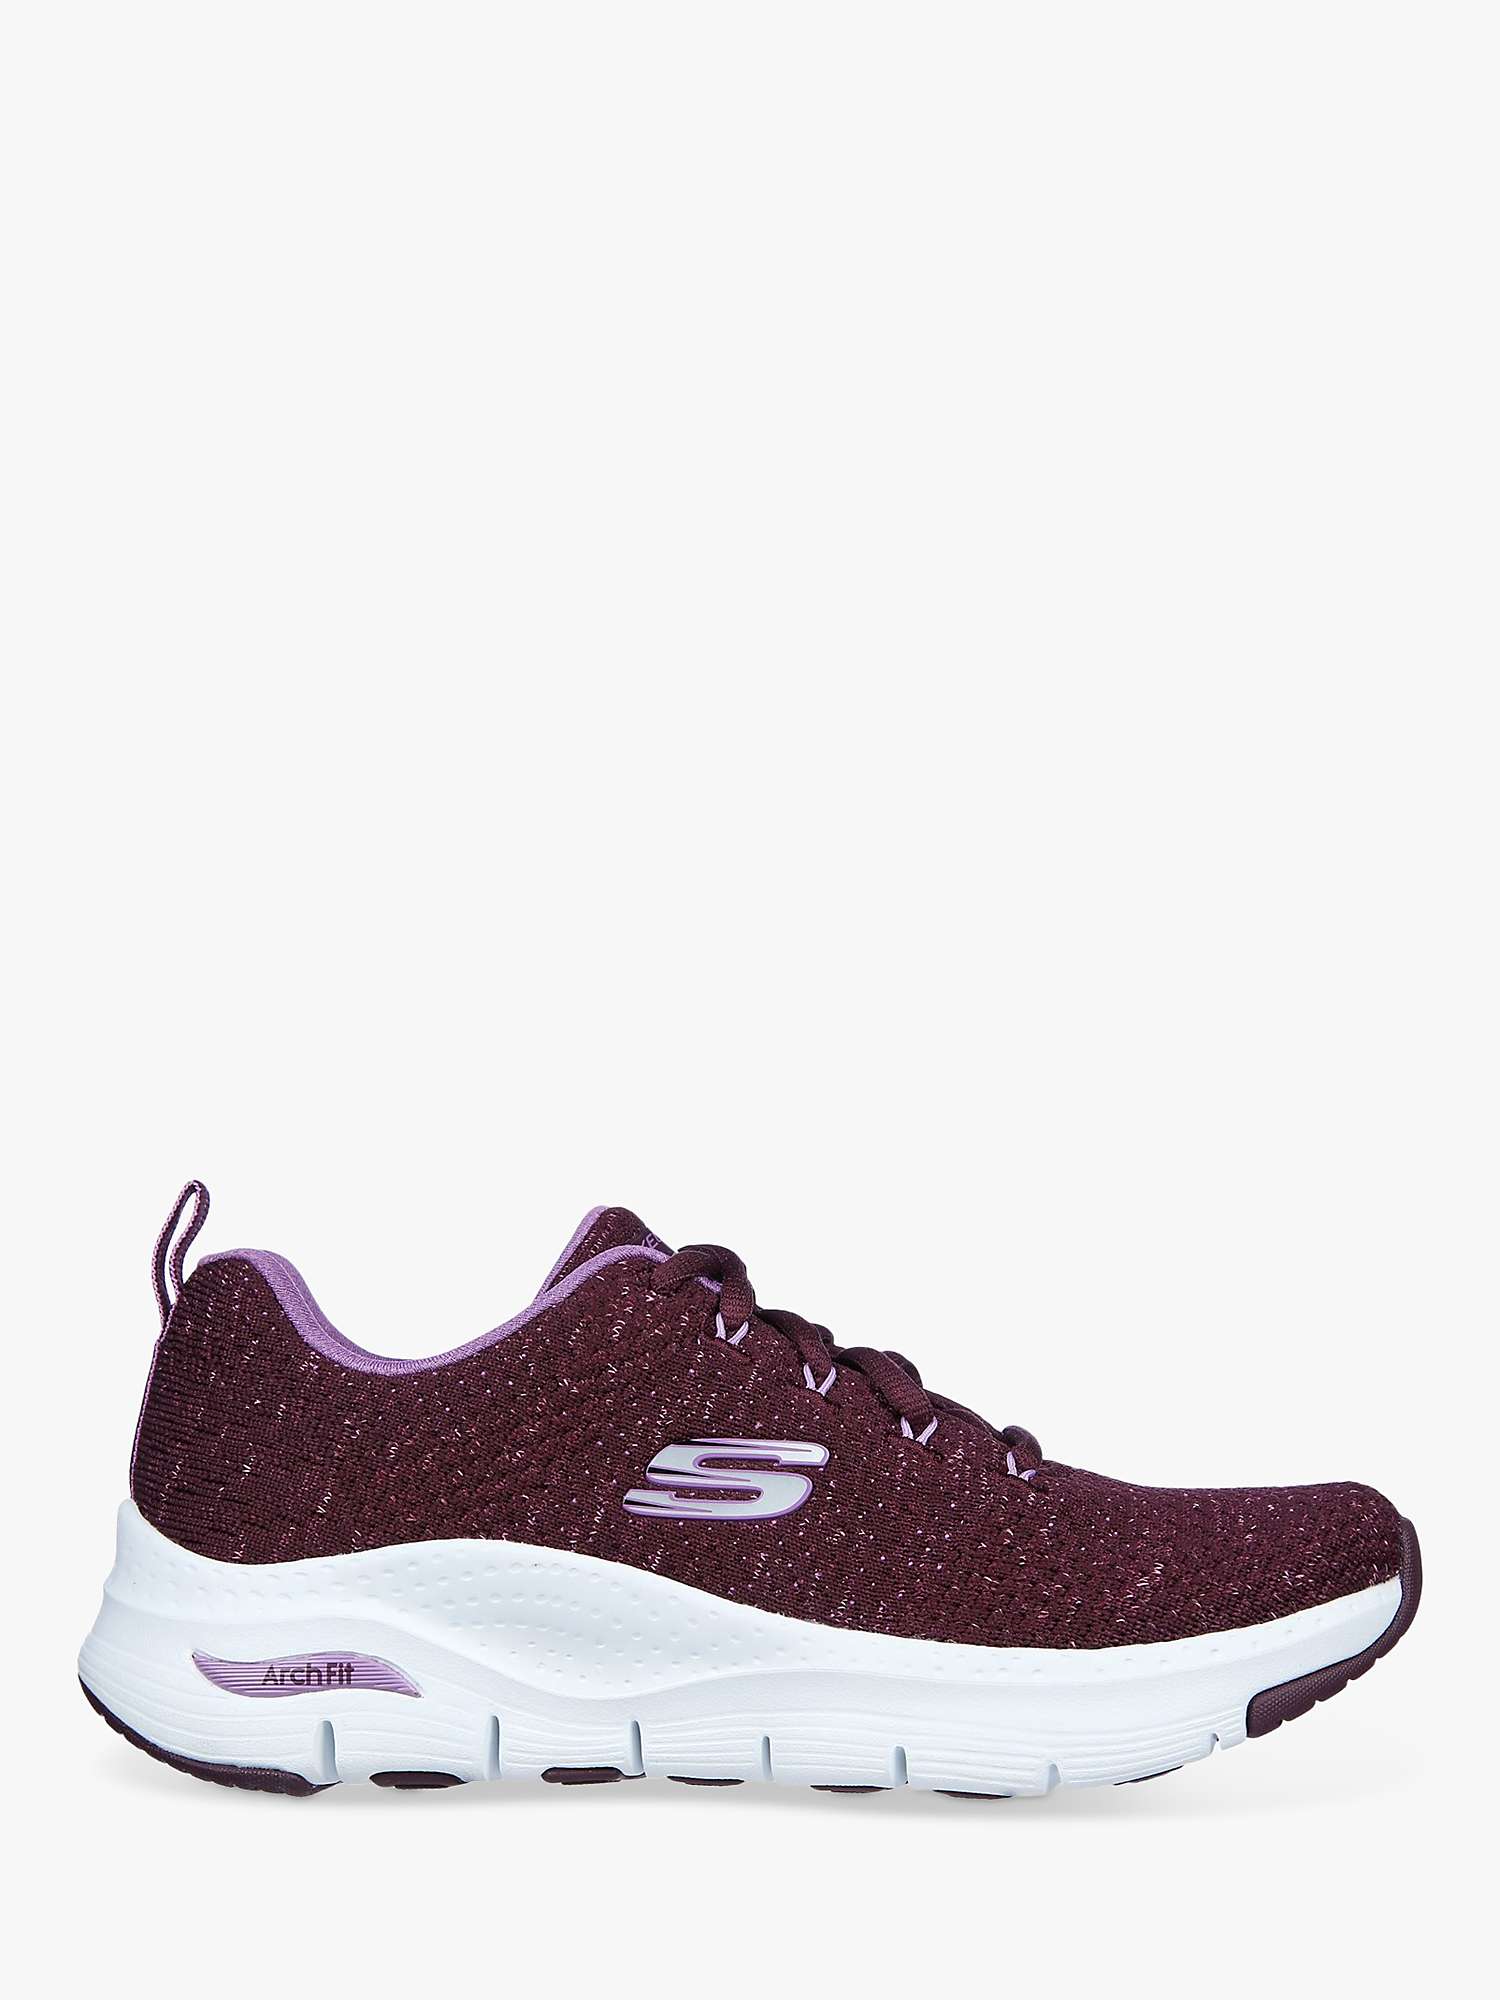 rizo pavimento Consultar Skechers Arch Fit Glee for All Lace Up Trainers, Plum at John Lewis &  Partners